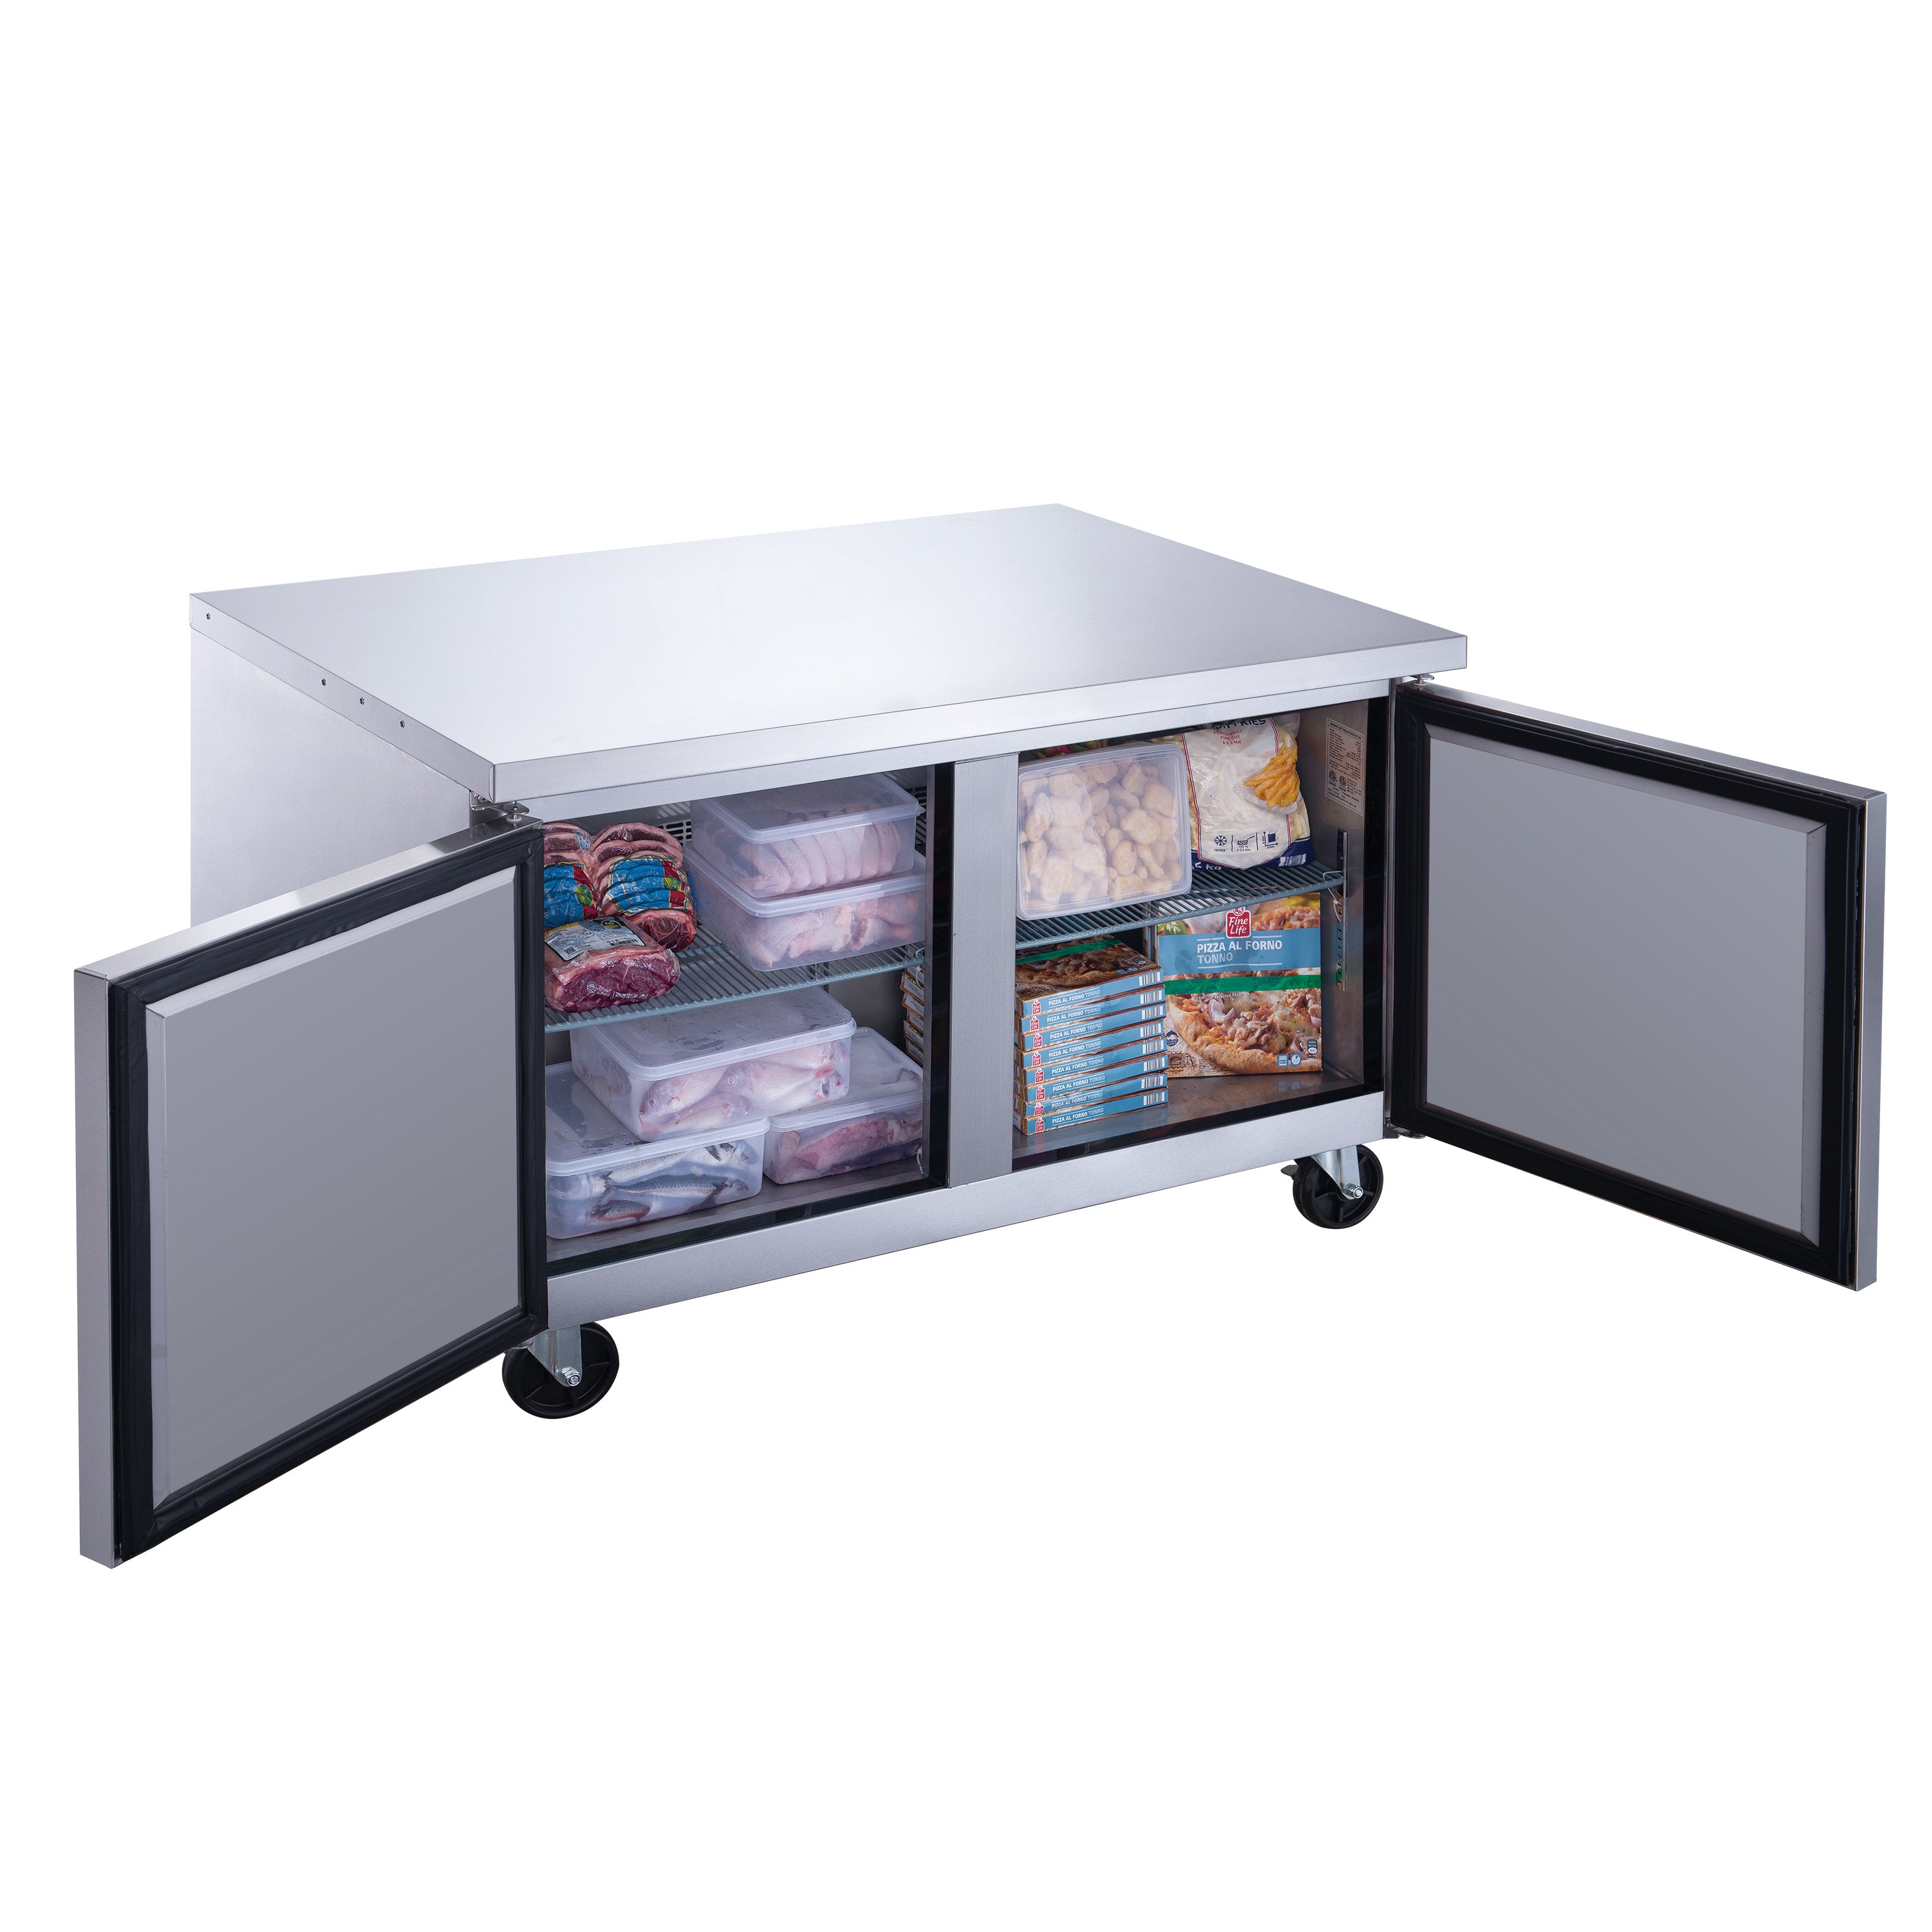 Chef AAA - TUC48R, Commercial 48" Undercounter Worktop Refrigerator 12.2 cu.ft. NSF